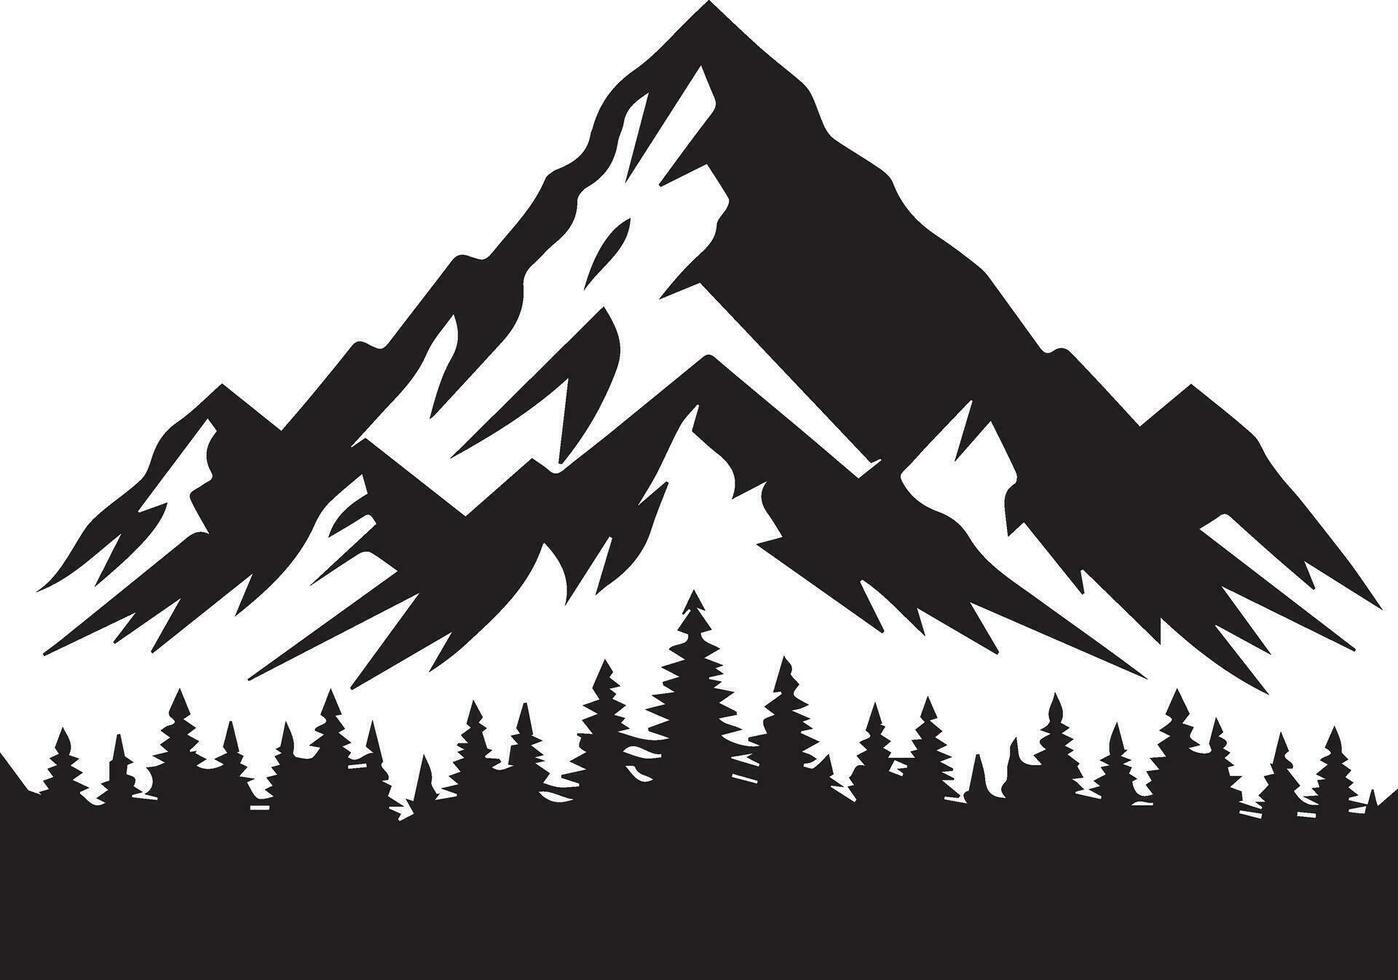 Mountain with forest vector silhouette illustration black color